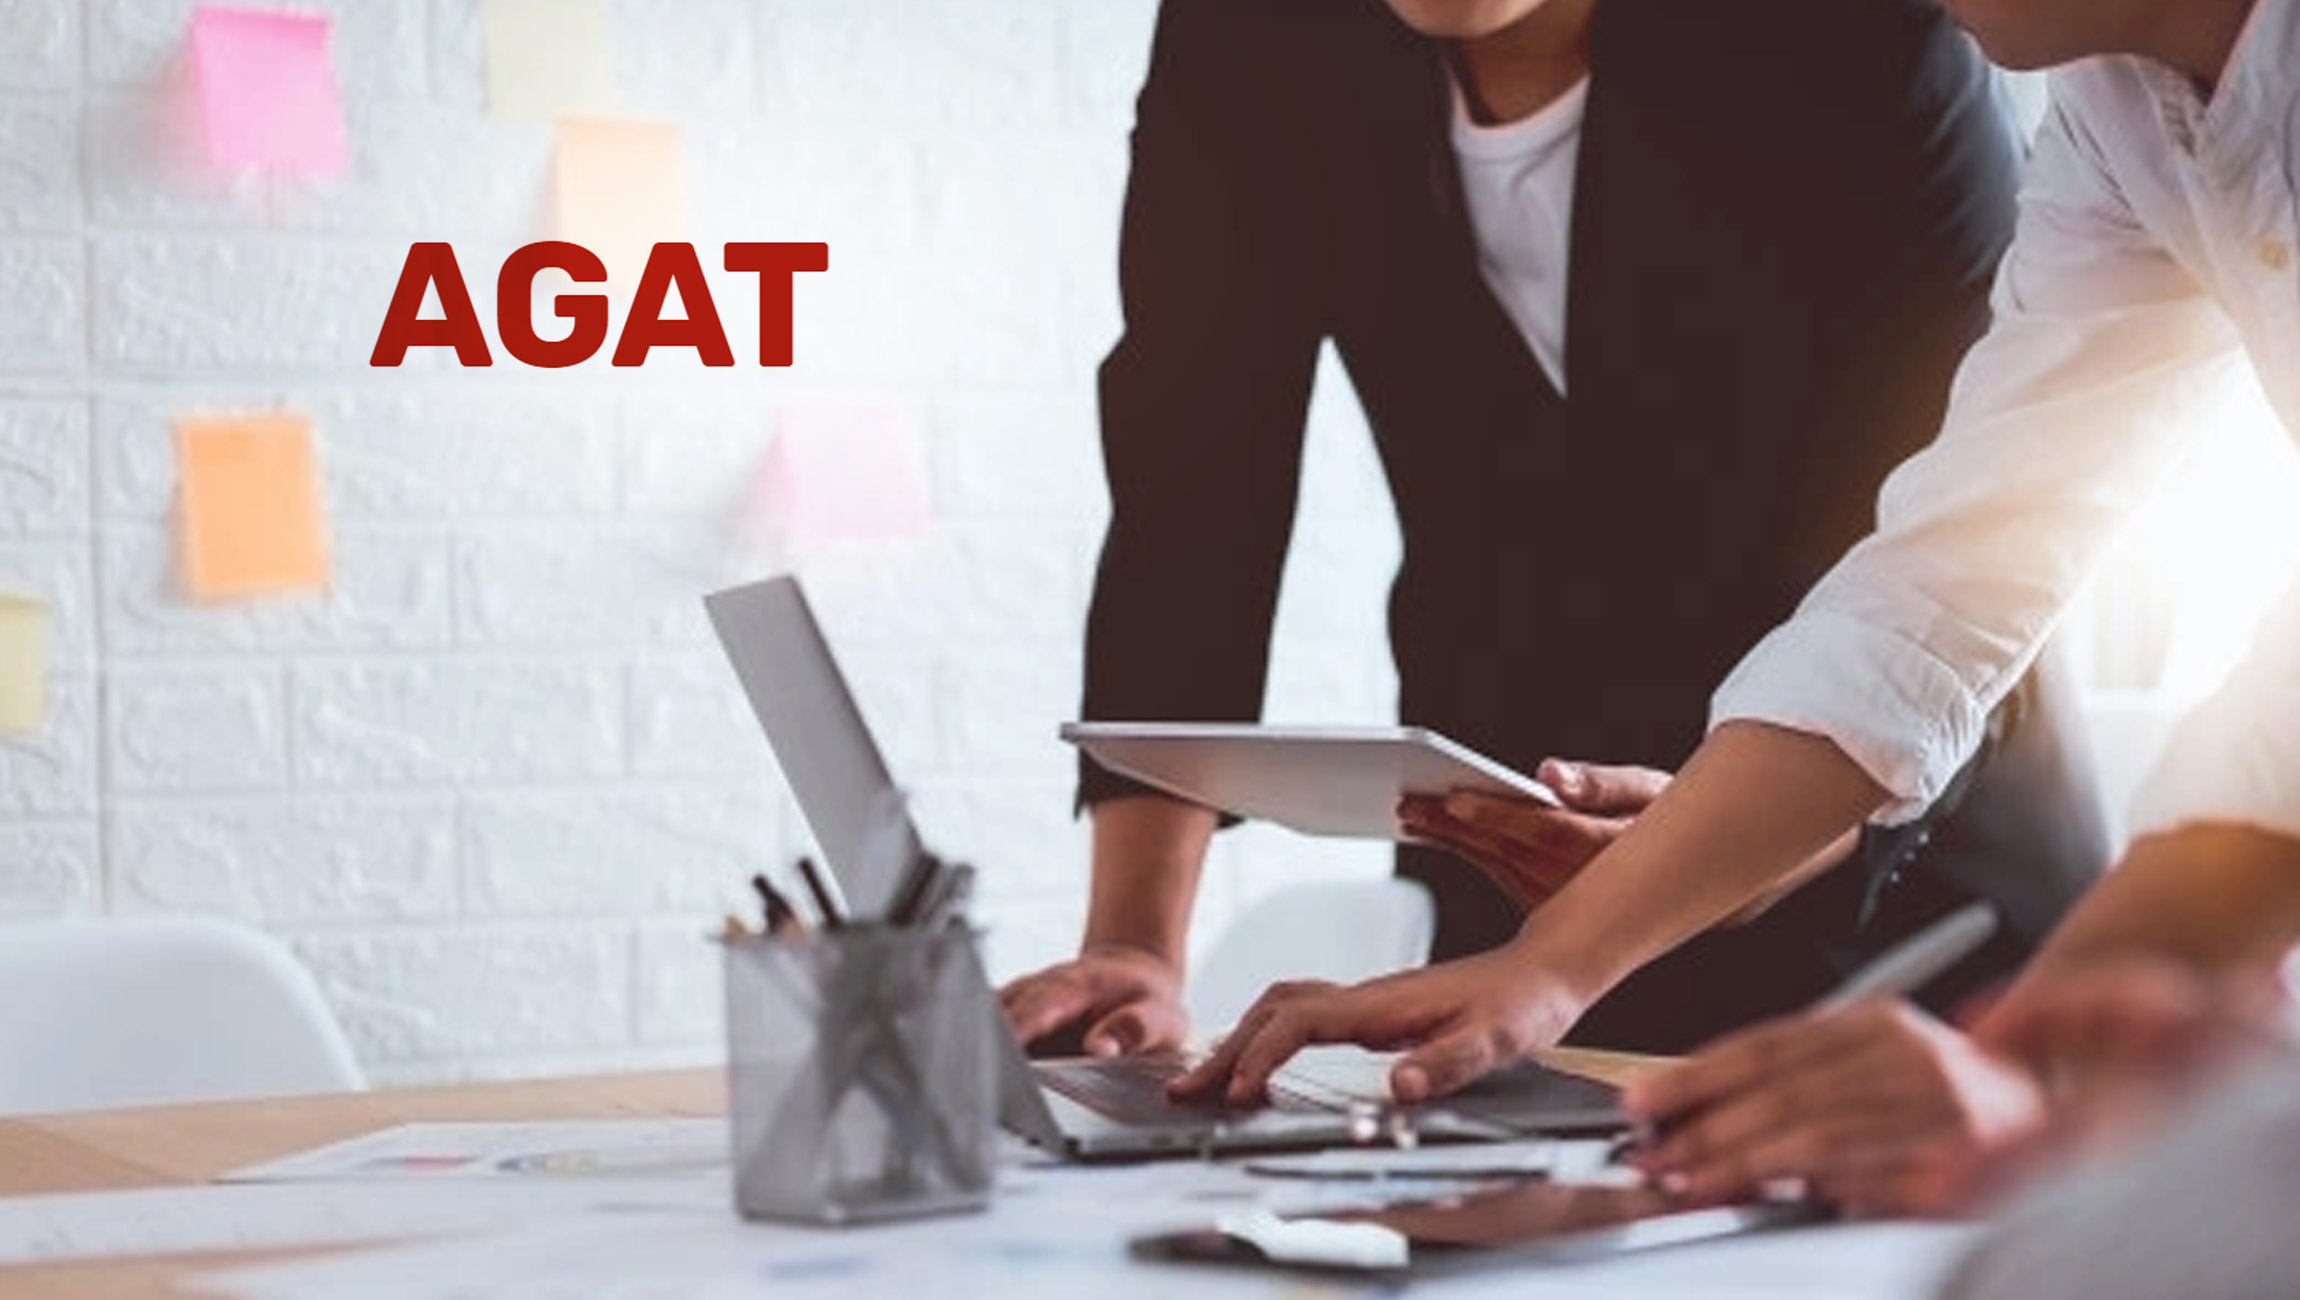 AGAT Announces the Launch of Agi - A Game-Changing AI Meeting Virtual Assistant for Microsoft Teams and Webex